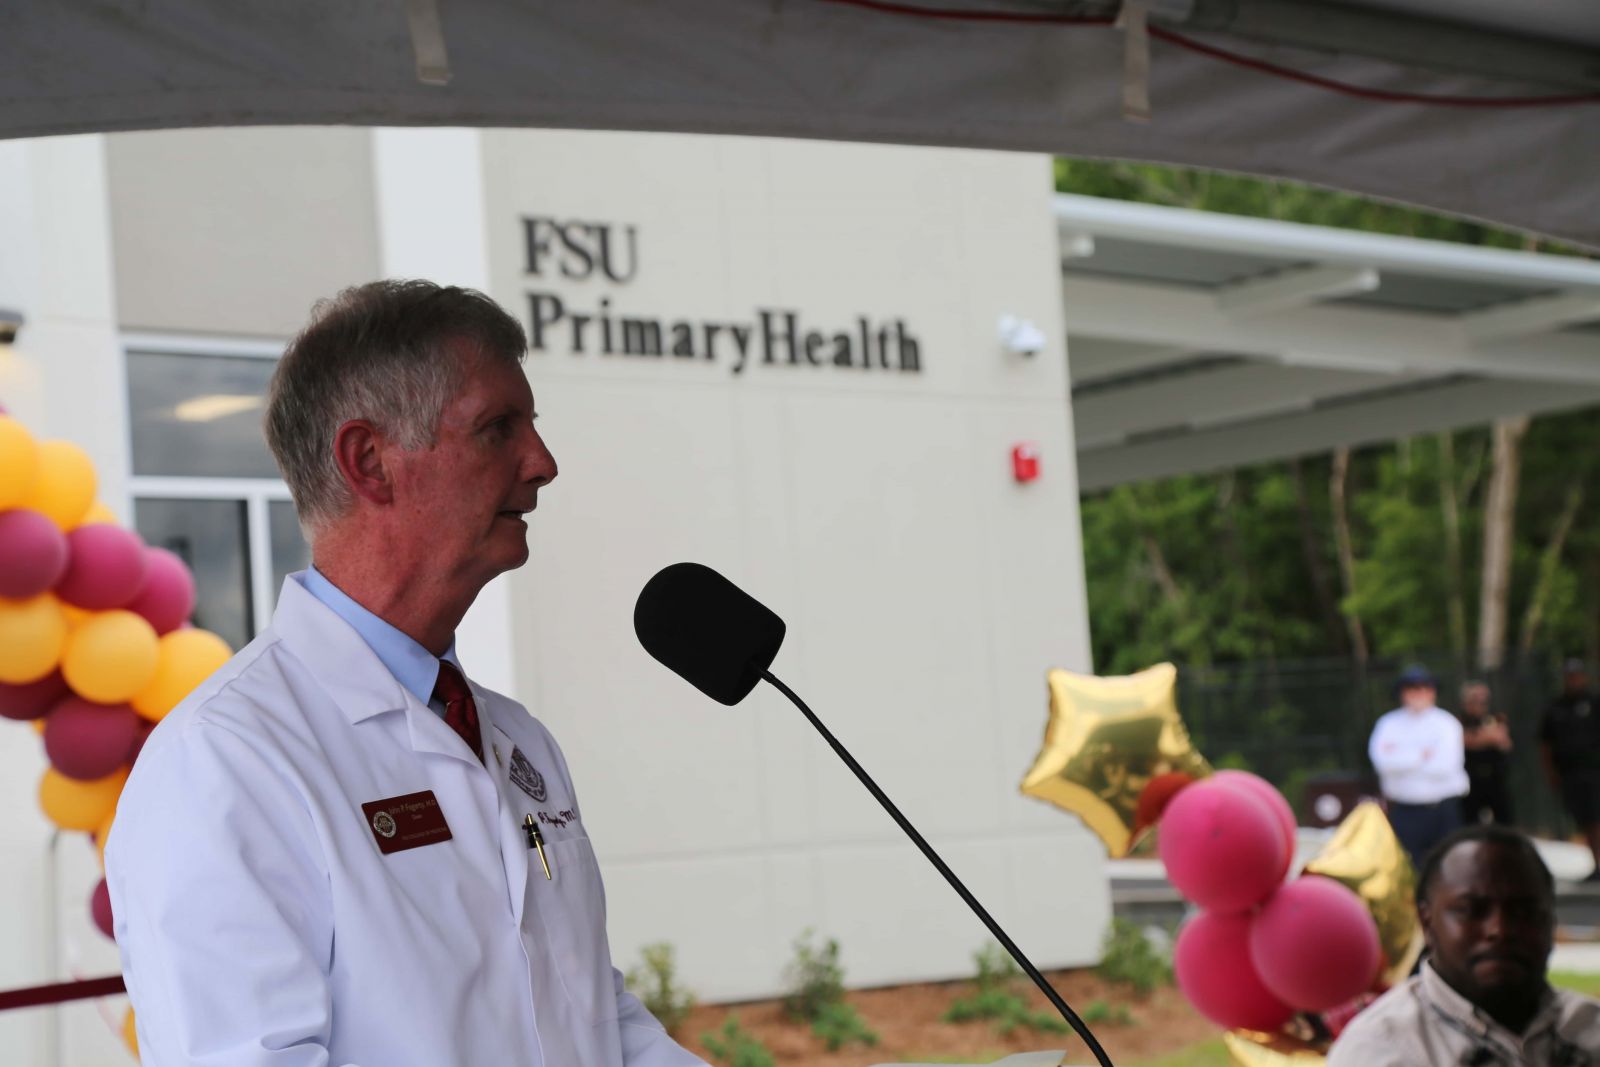 College of Medicine Dean John P. Fogarty delivers remarks ahead of the ribbon-cutting ceremony for FSU PrimaryHealth.